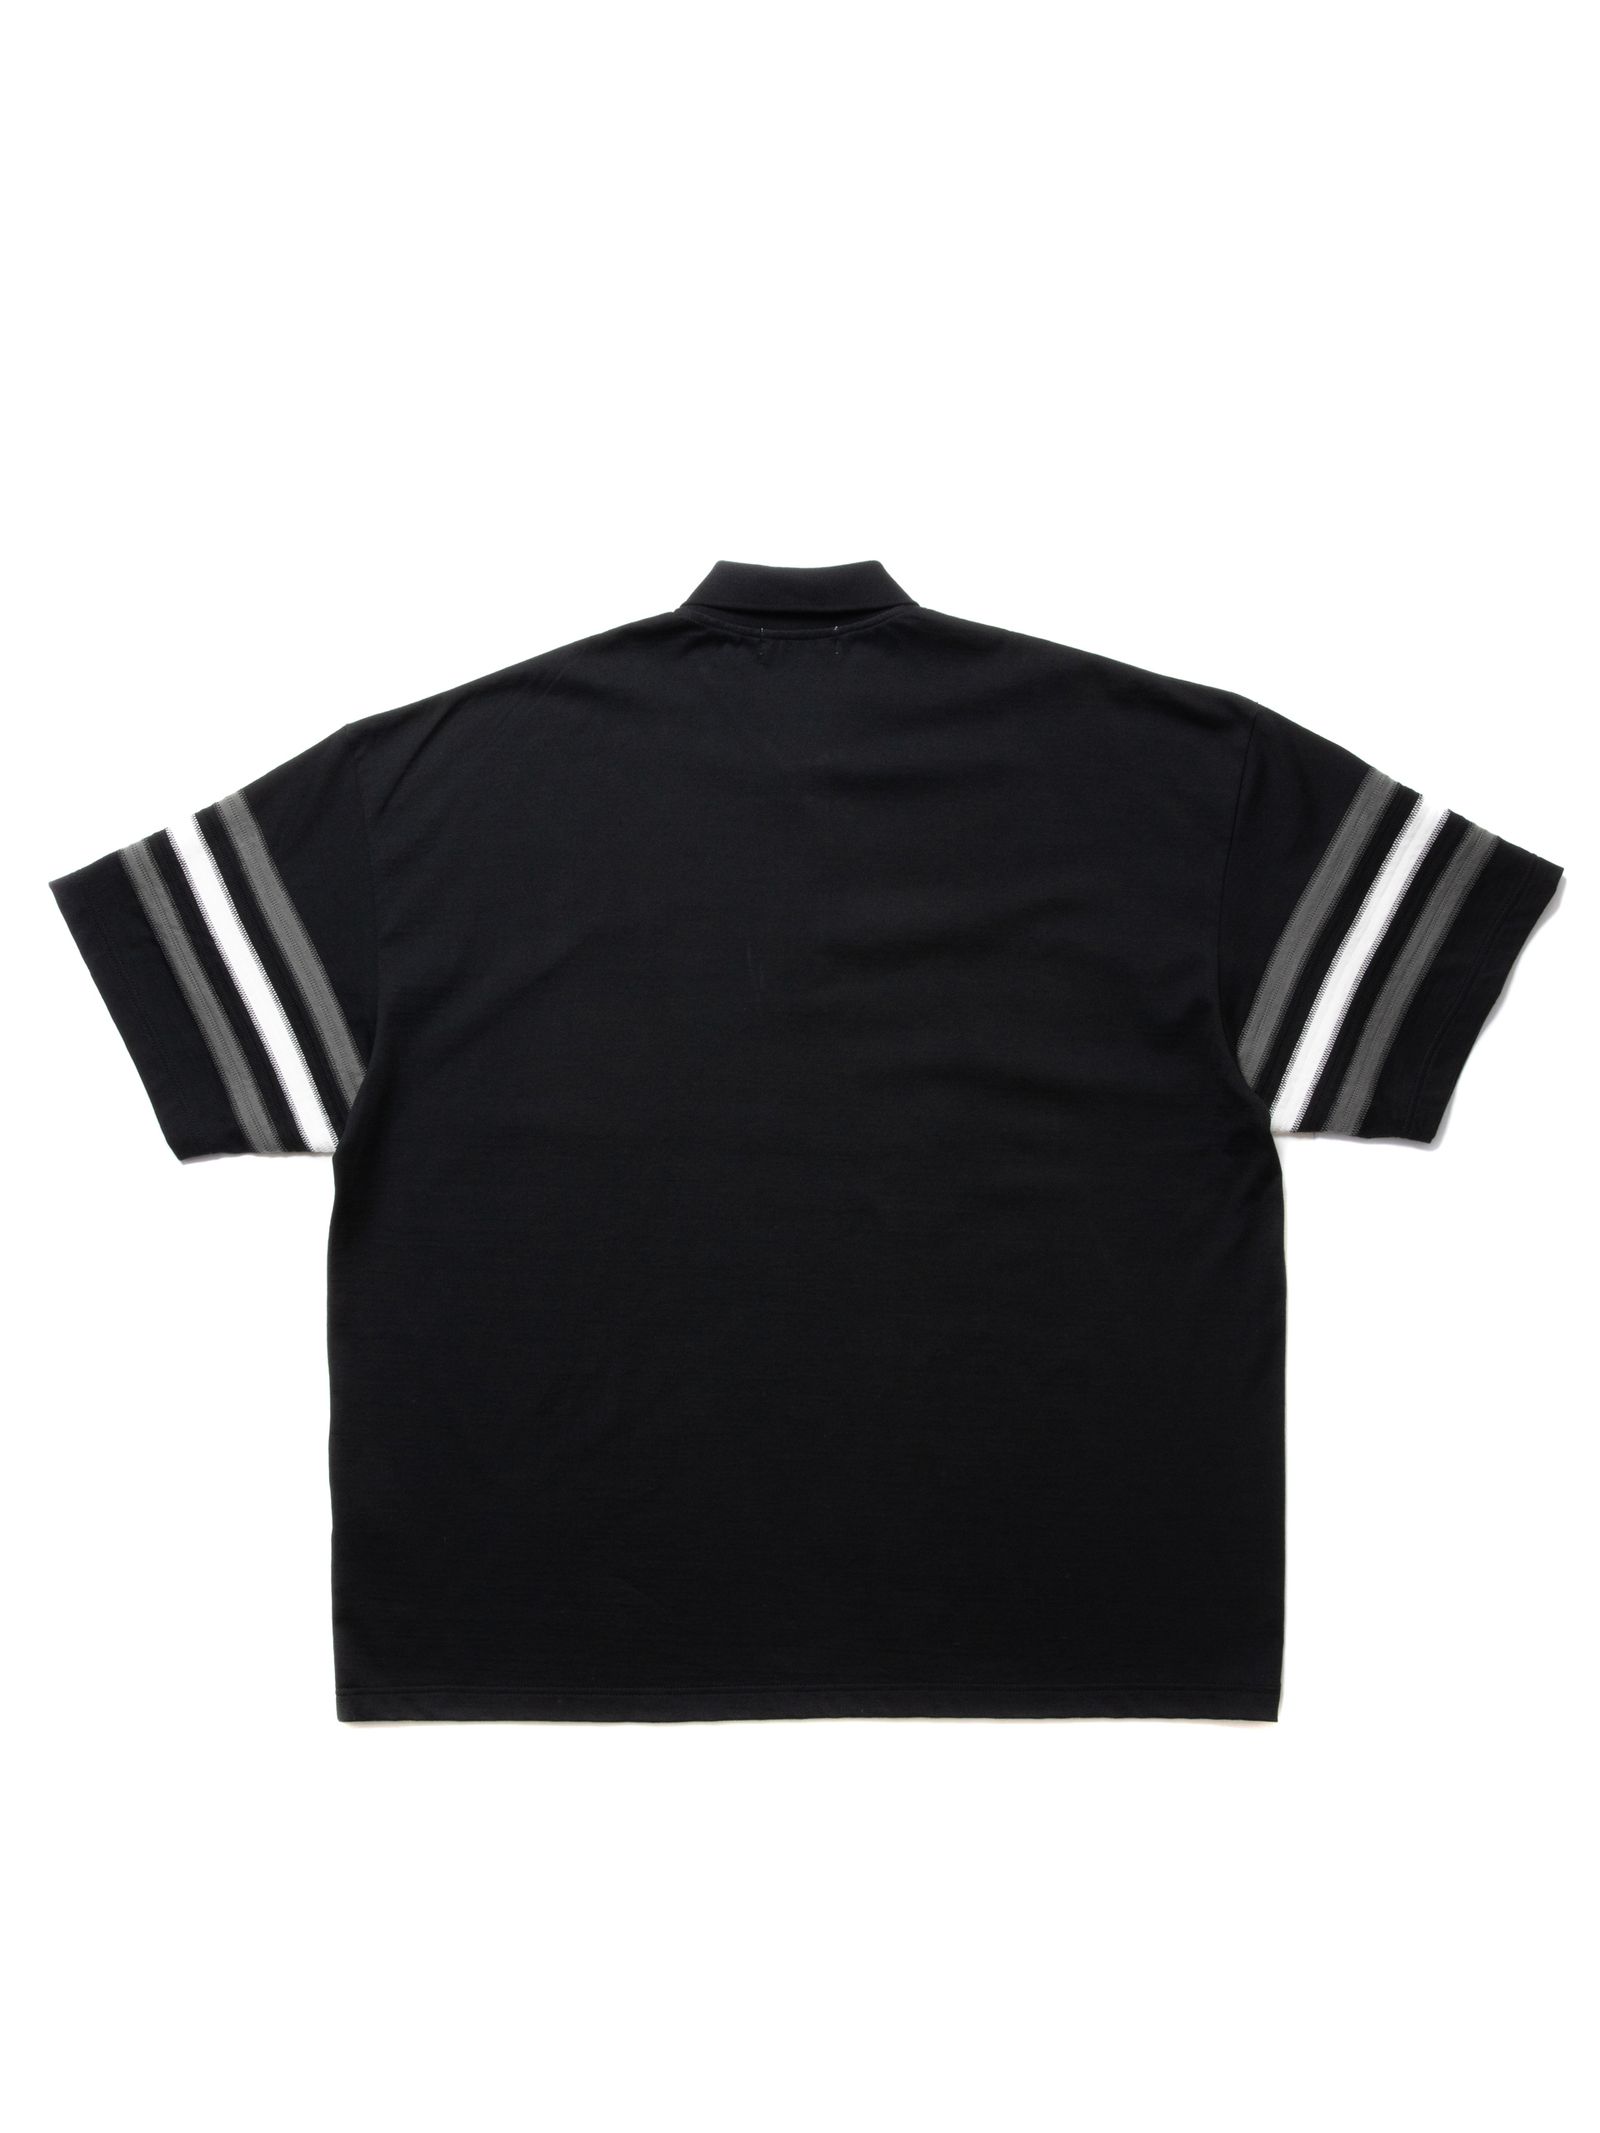 COOTIE PRODUCTIONS - Jacquard Sleeve S/S Polo / Black / ジャガード 